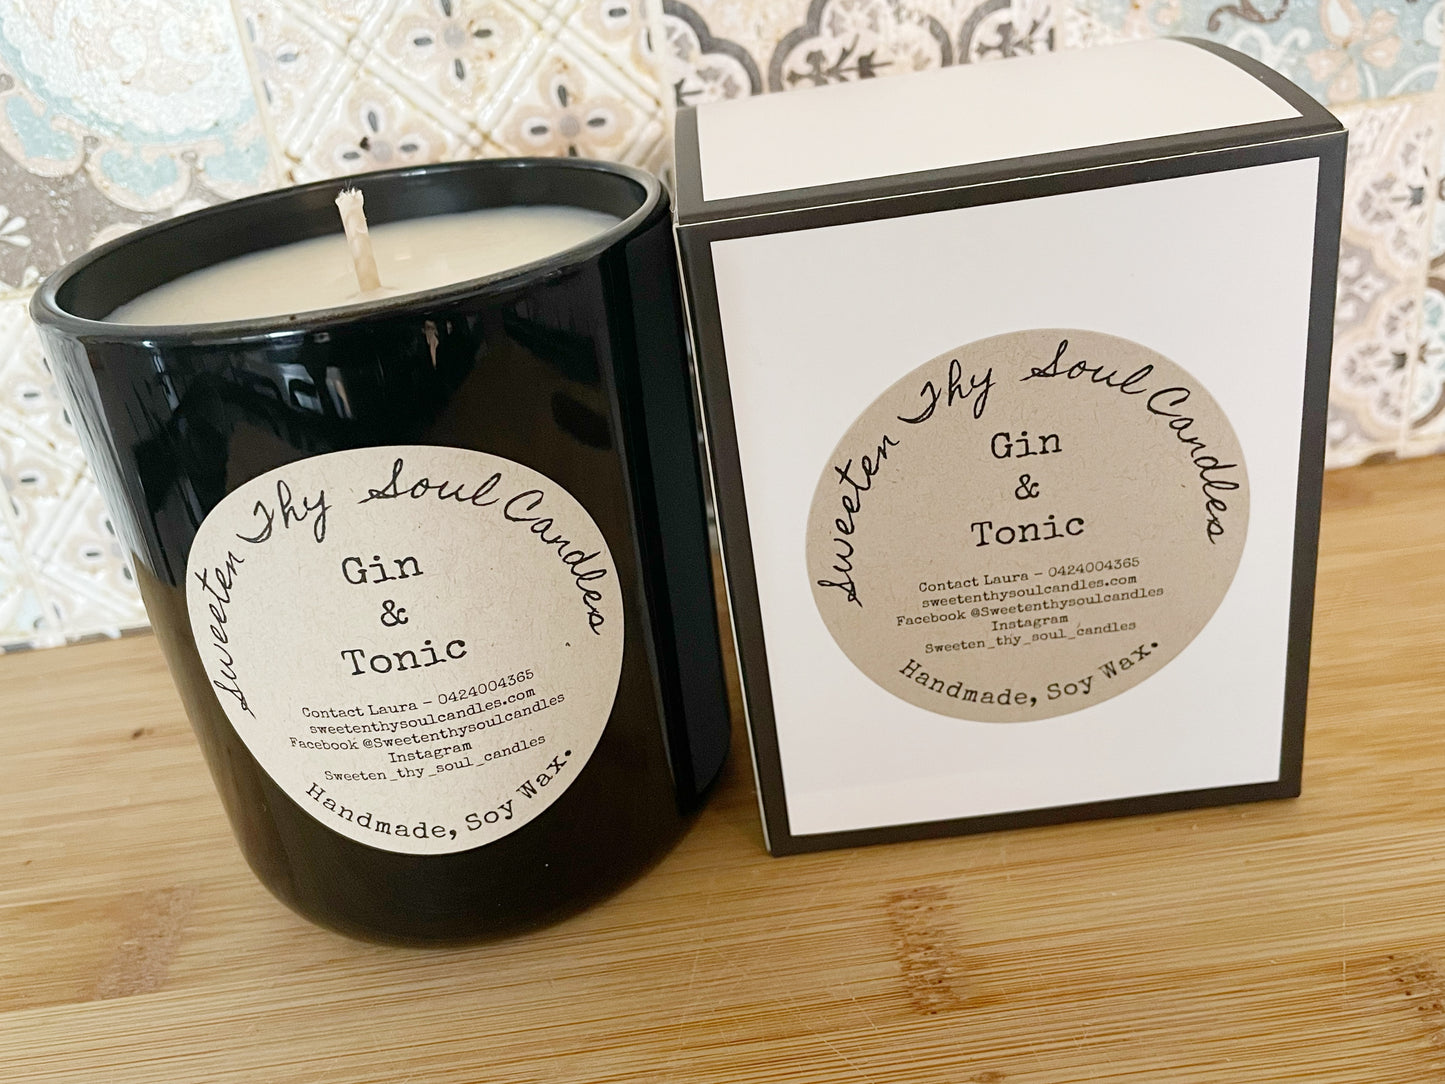 Gin & Tonic 330g soy candle